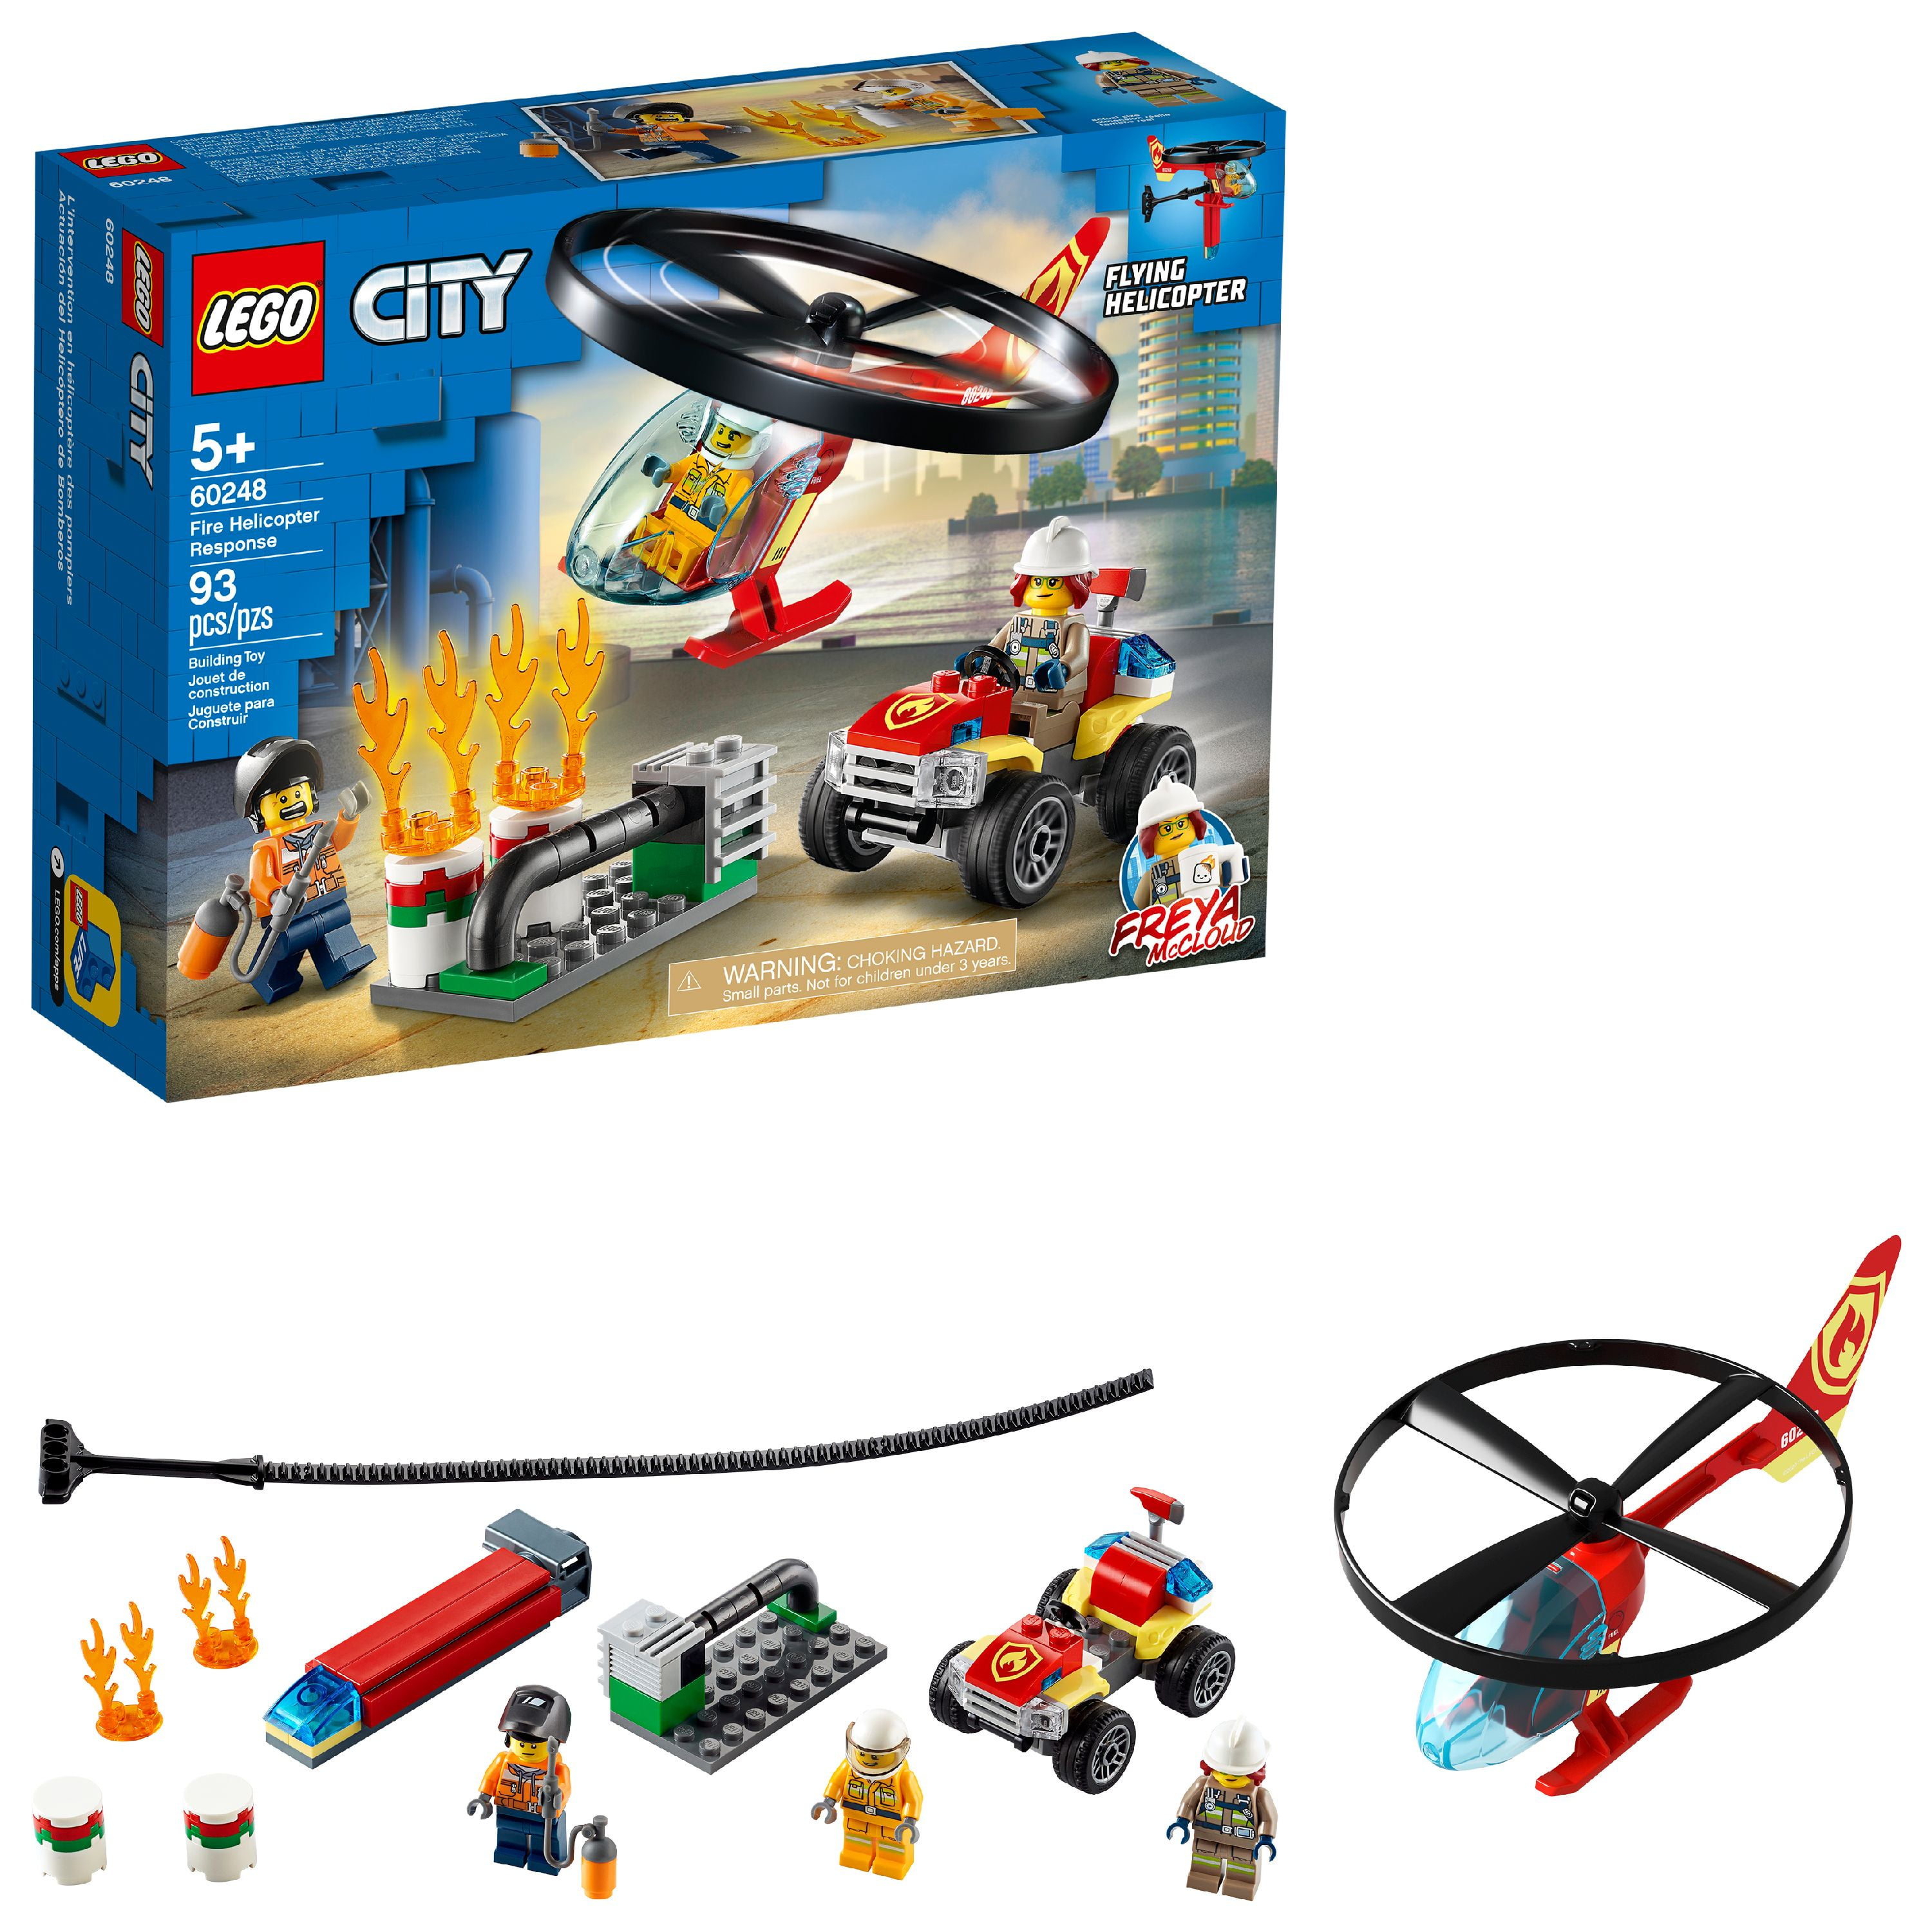 LEGO City Fire Helicopter Response Firefighter Building Set 60248